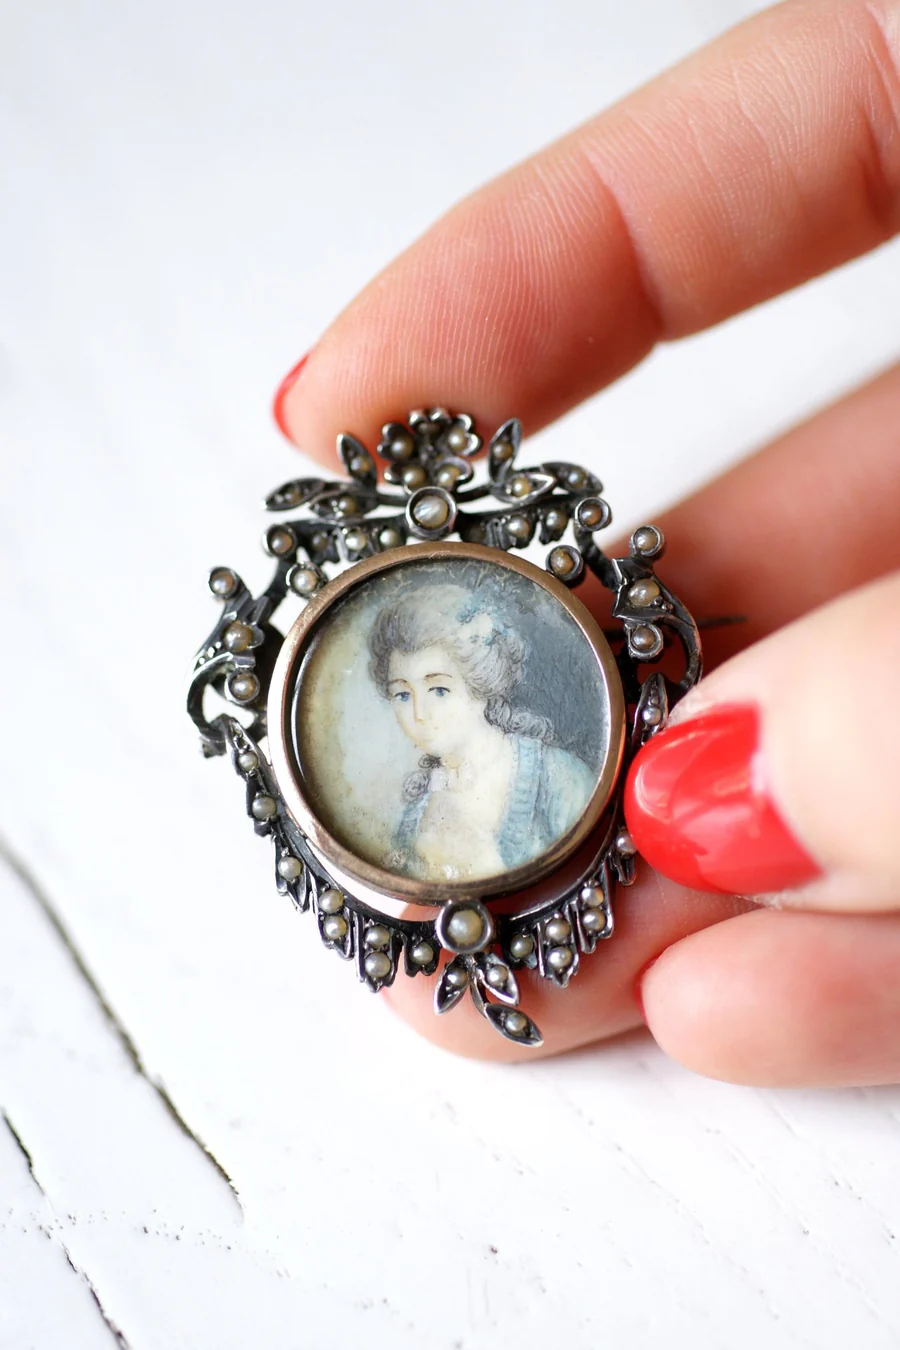 Antique Victorian brooch in gold and silver with miniature - Galerie Pénélope